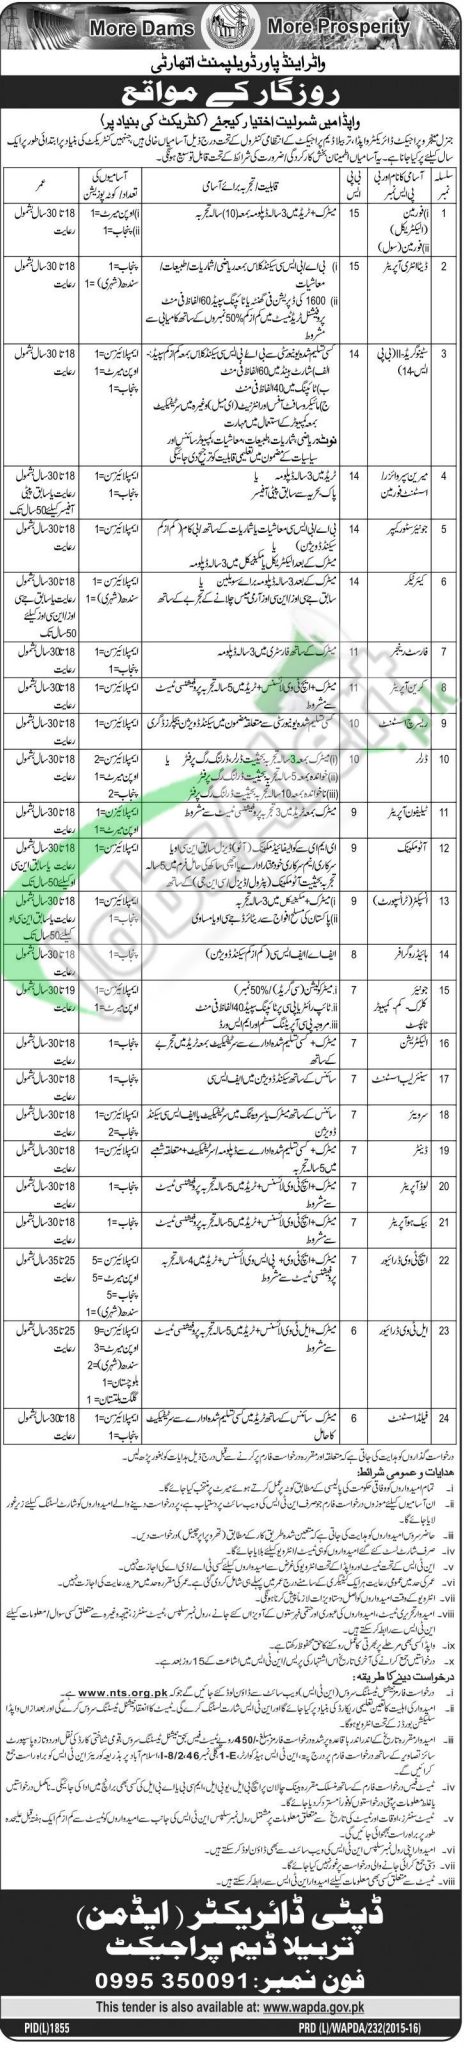 Recruitment Offers in WAPDA For Data Entry Operator and Stenographer